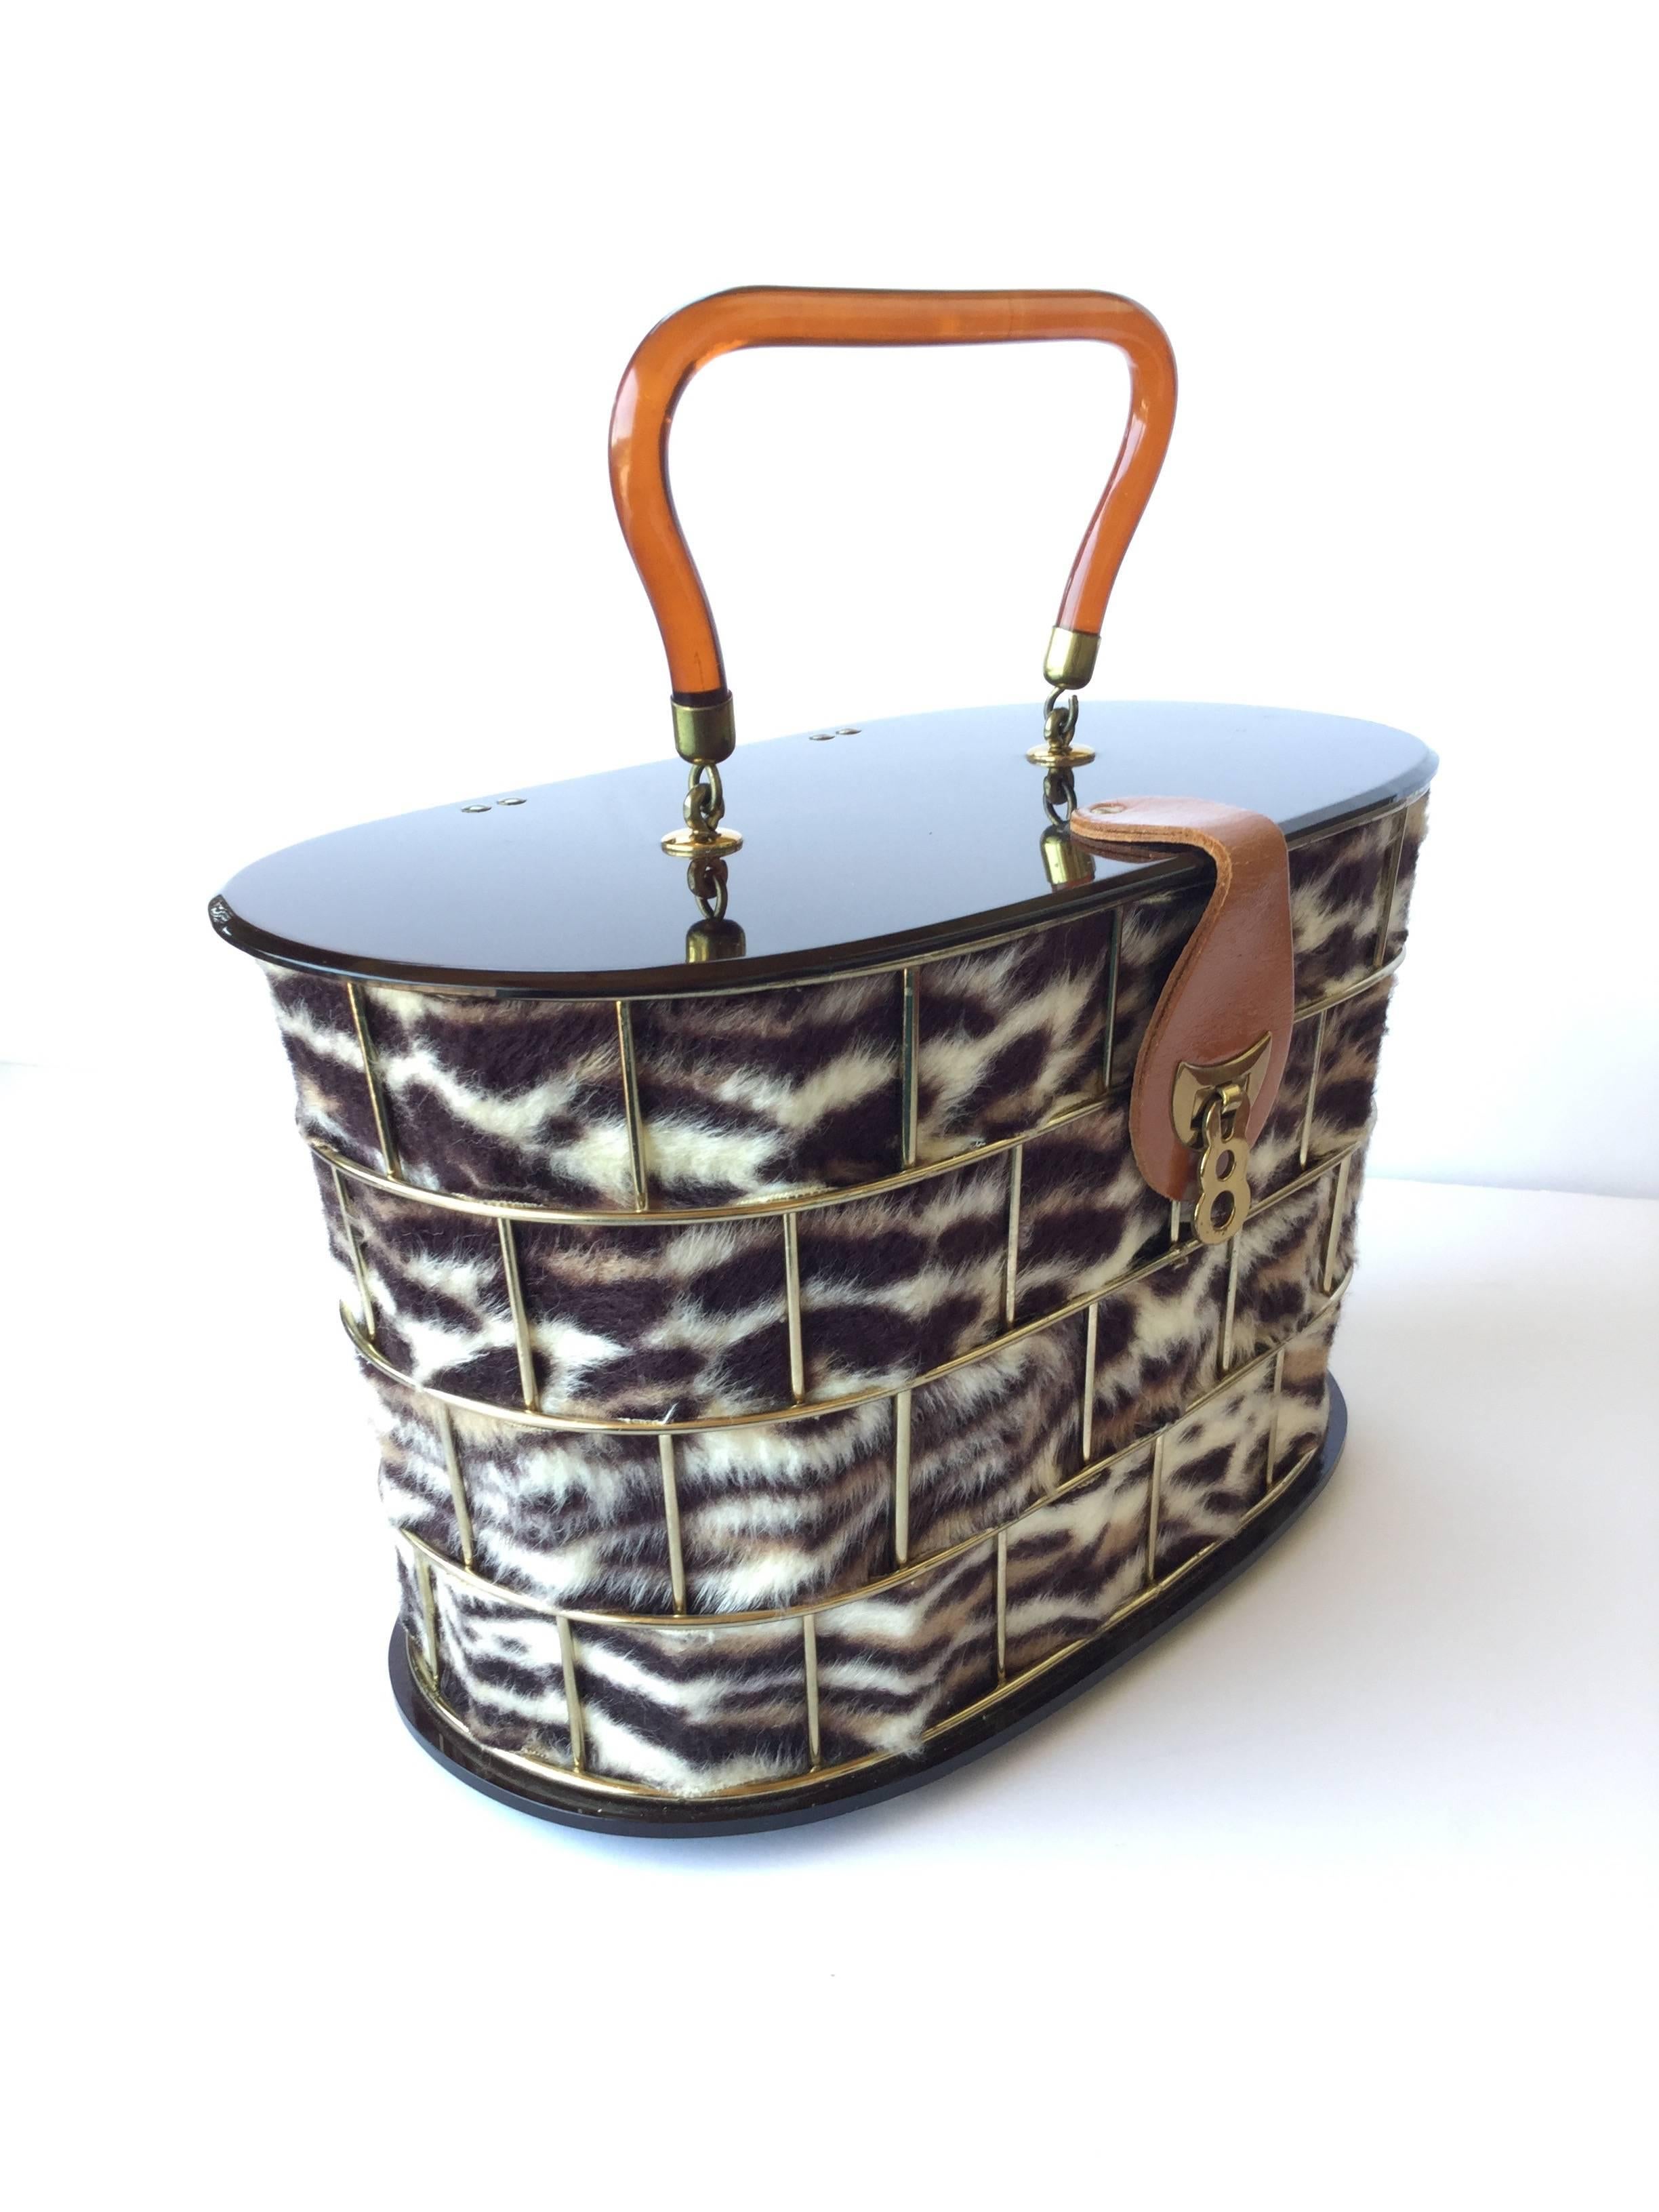 Fantastic 1950's Dorset Rex handbag with furry faux leopard strips weaving
through a gilt metal cage frame. Shiny chocolate brown lucite top and bottom. 
Graceful honey colored lucite handle. Leather and gilt clasp. Lined in silky peach satin.  This